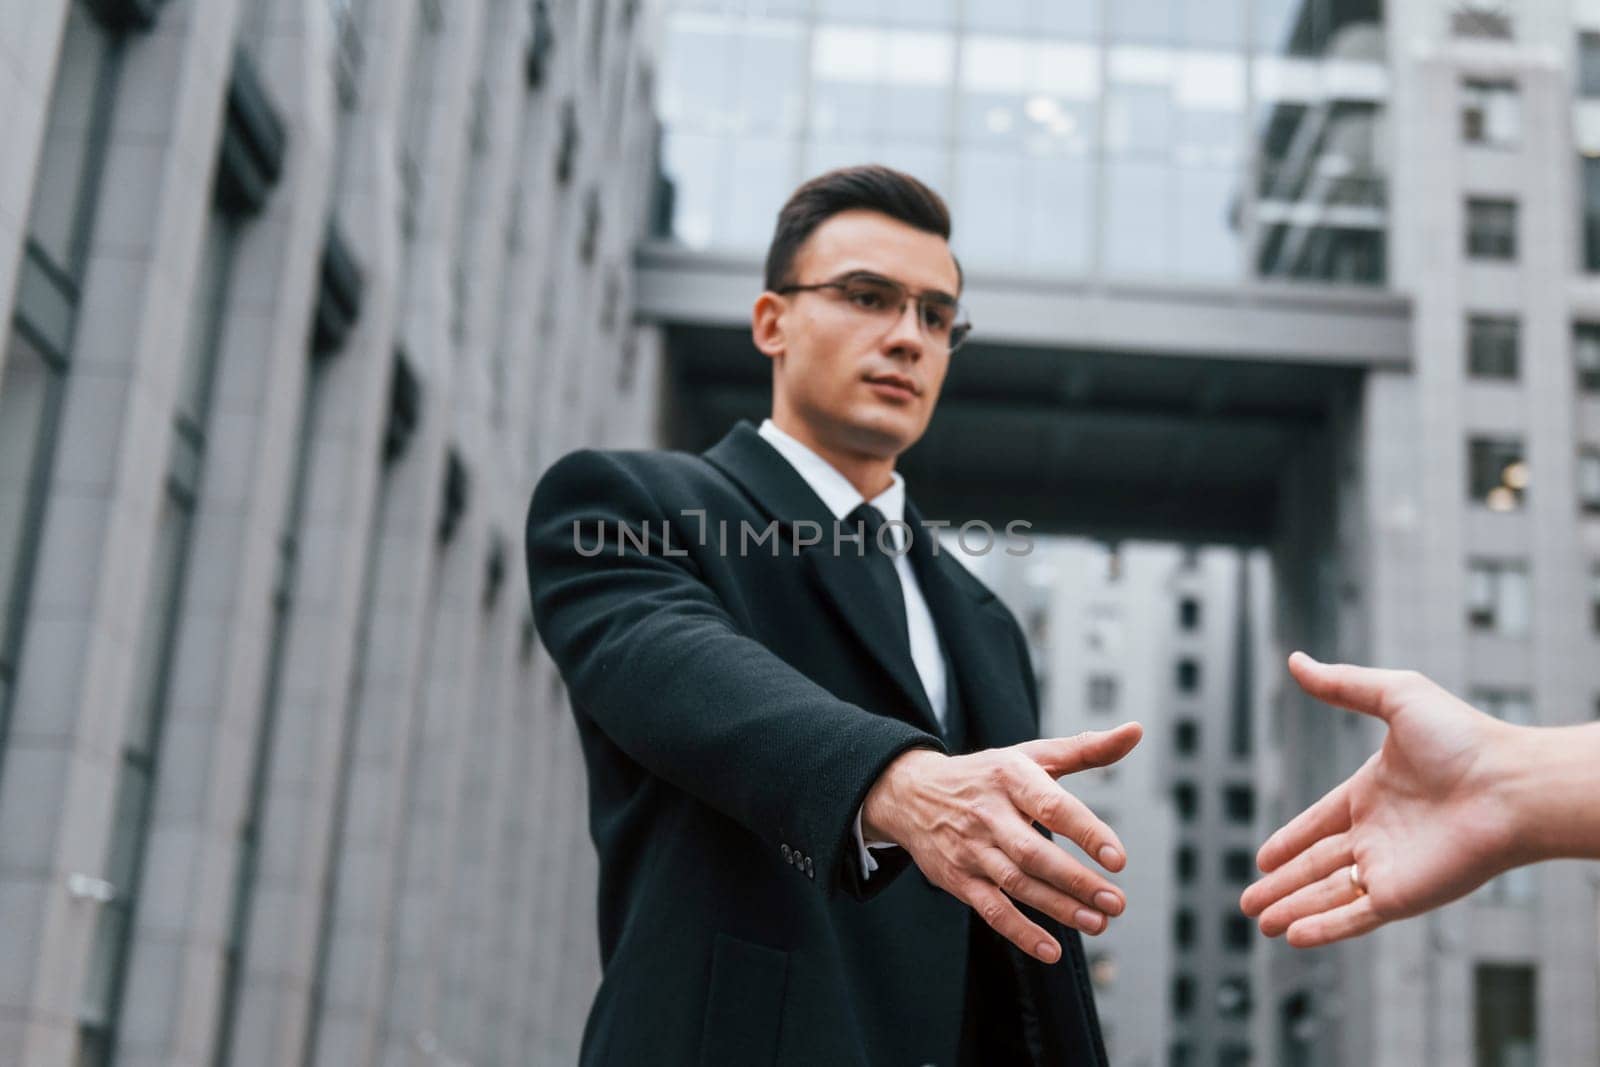 Doing handshake. Businessman in black suit and tie is outdoors in the city.